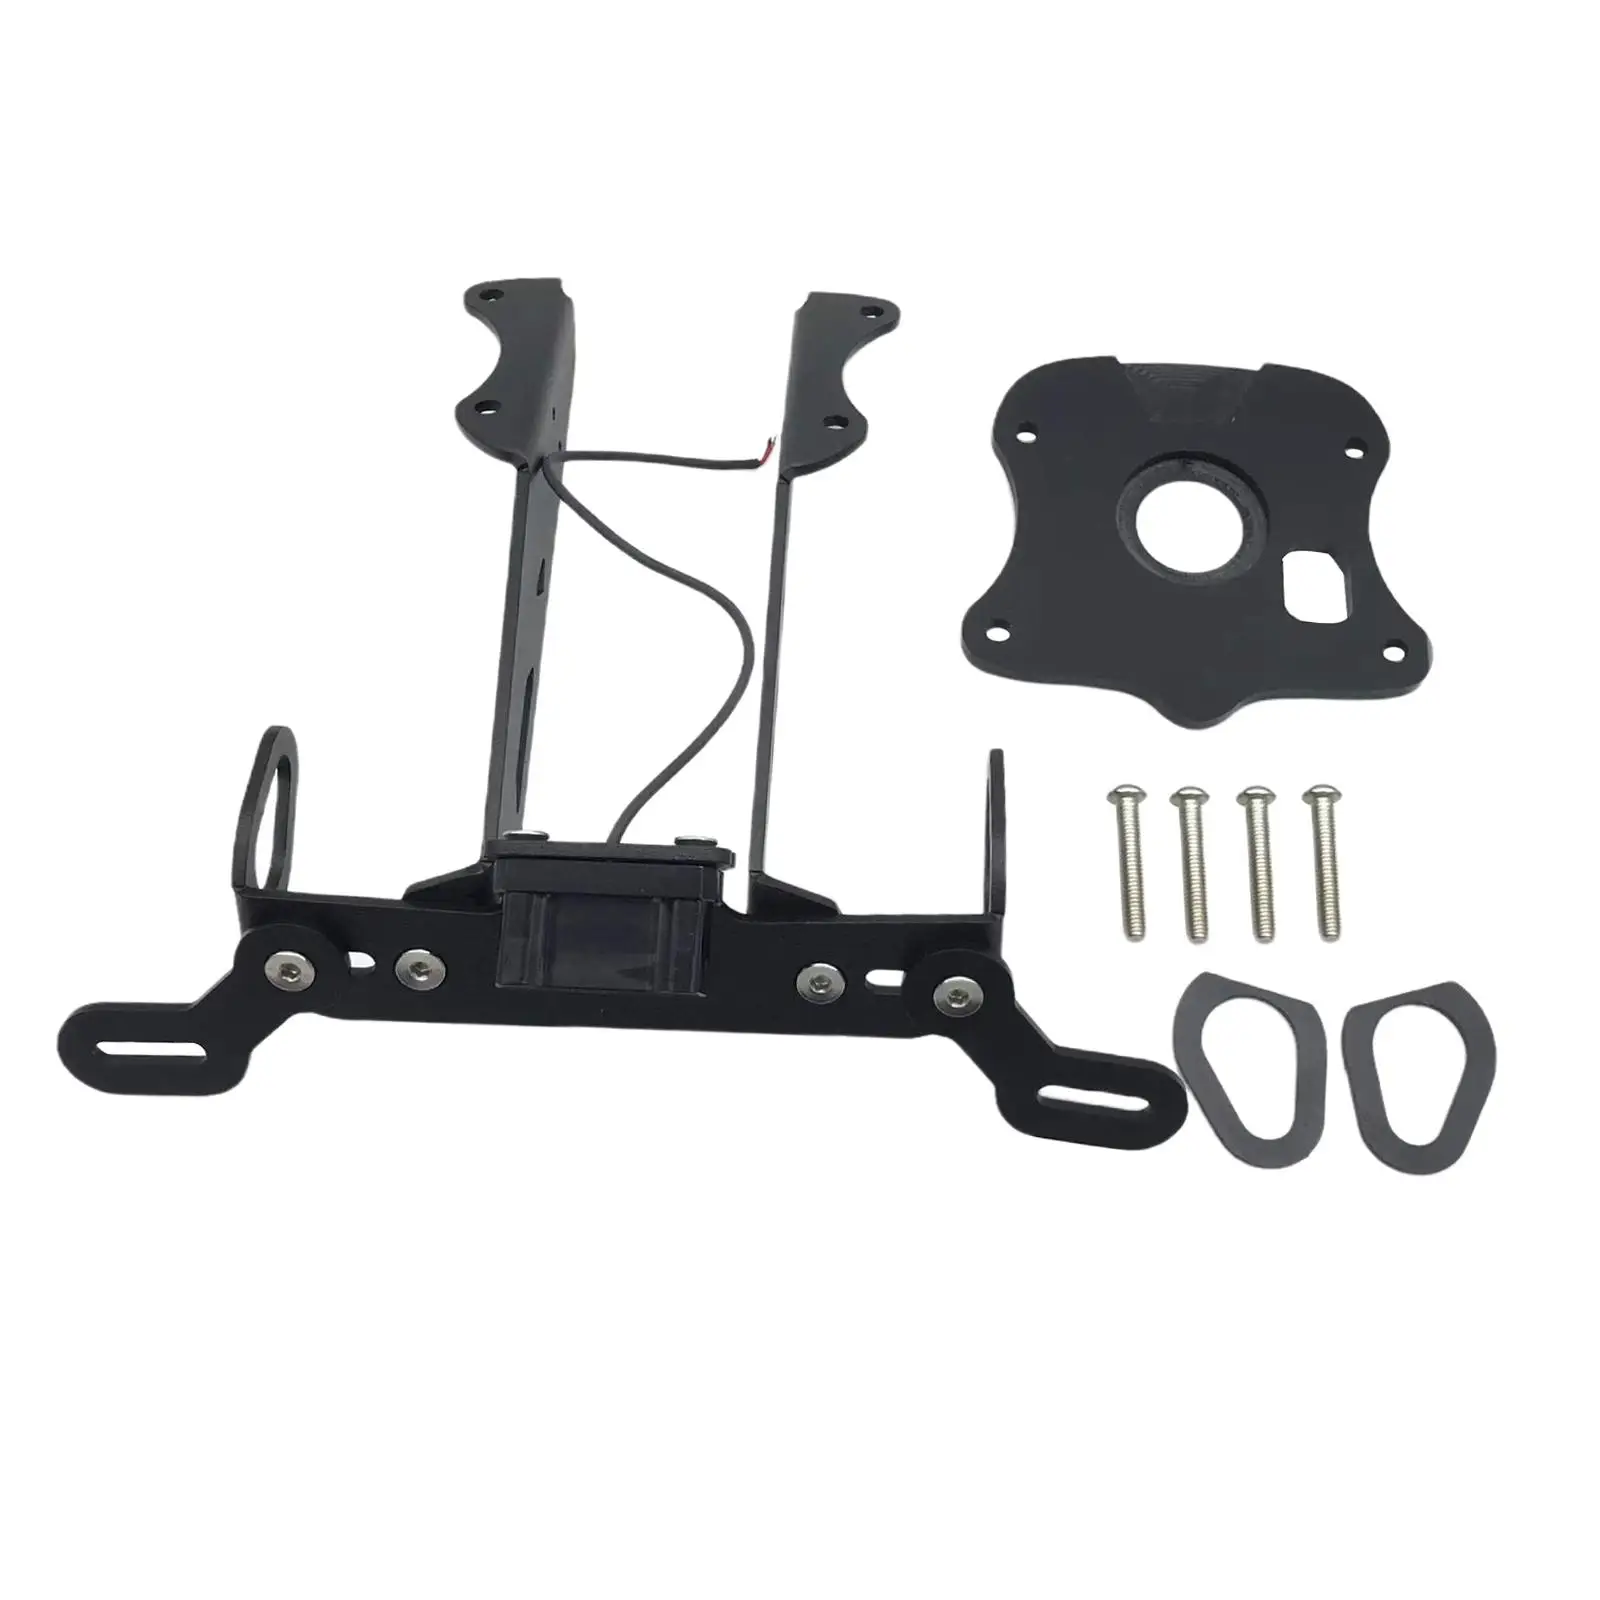 Plate Holder Plate Mount Holder Motorcycle Plate Bracket Rear 21+ Accessories Parts